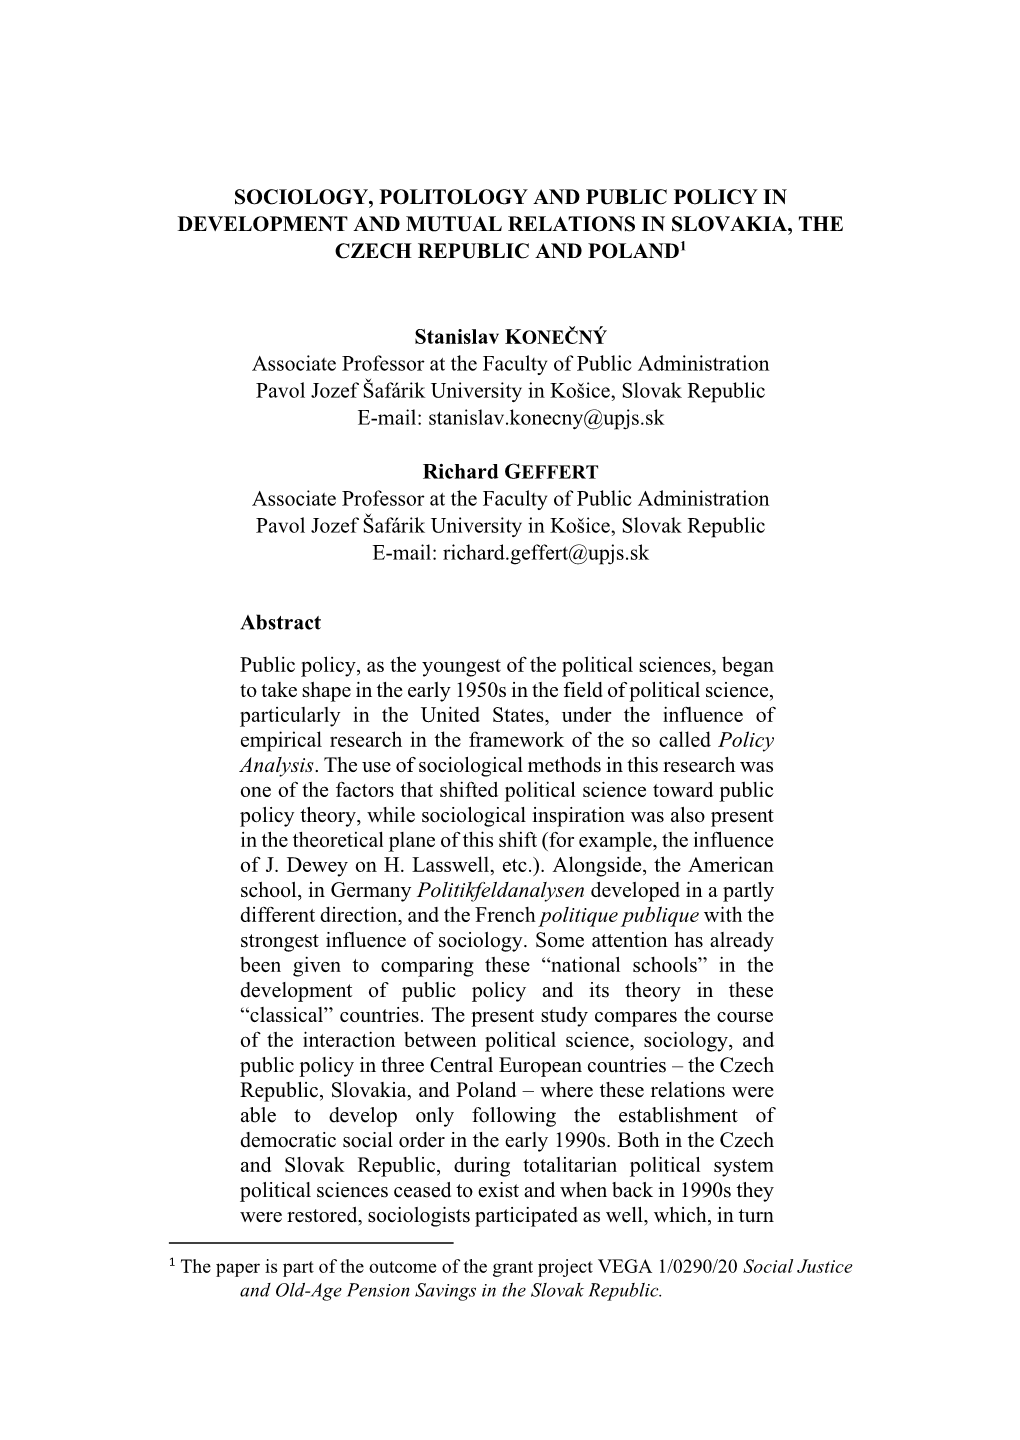 Sociology, Politology and Public Policy in Development and Mutual Relations in Slovakia, the Czech Republic and Poland1